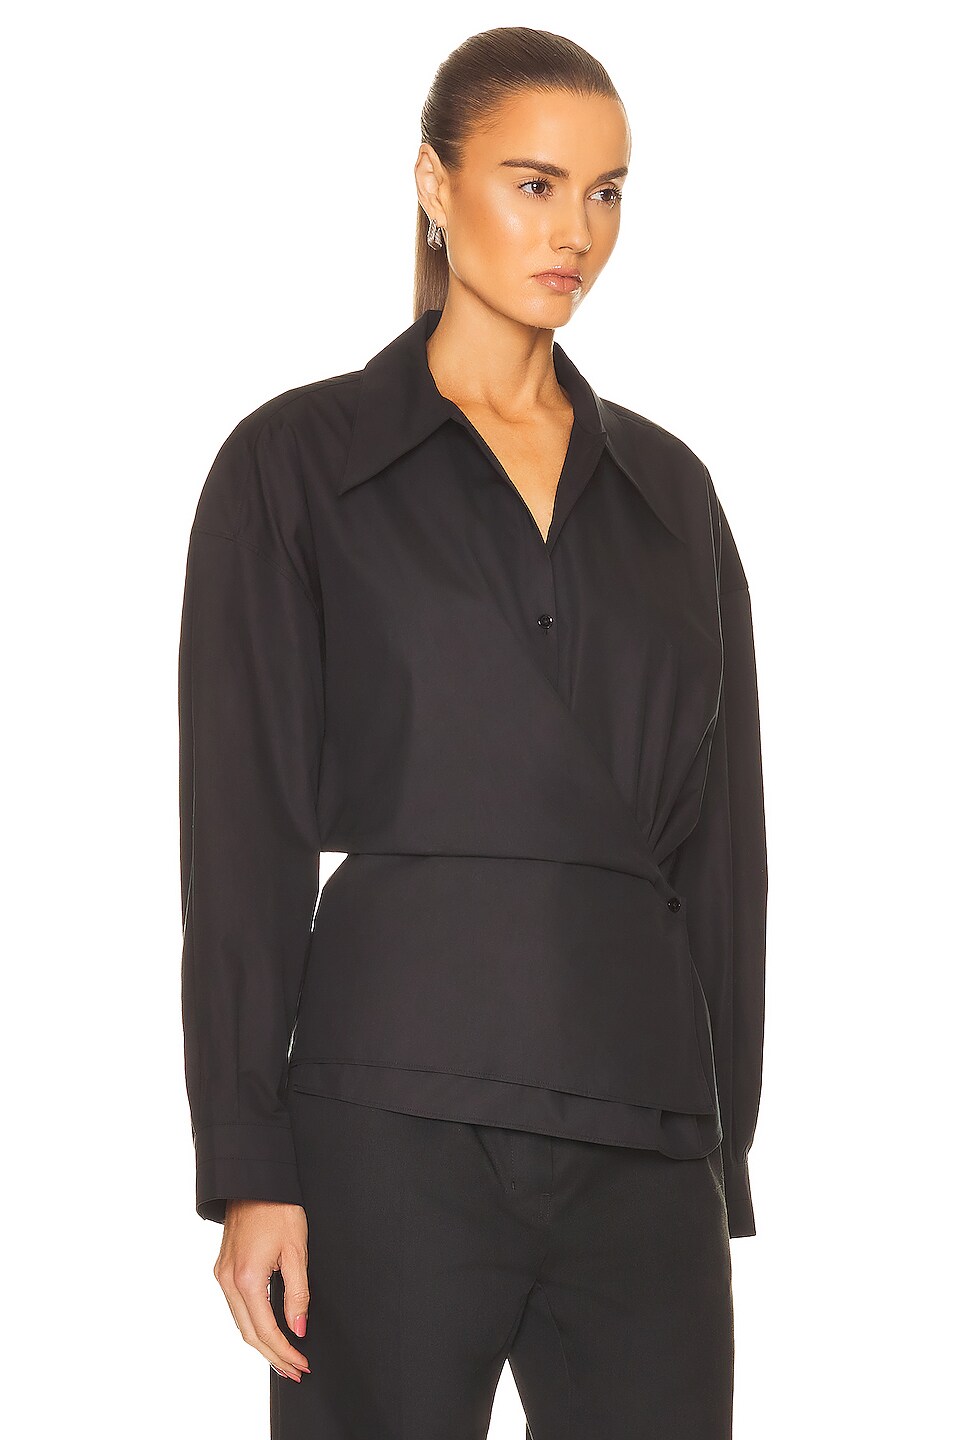 Lemaire Twisted Shirt in Black | FWRD